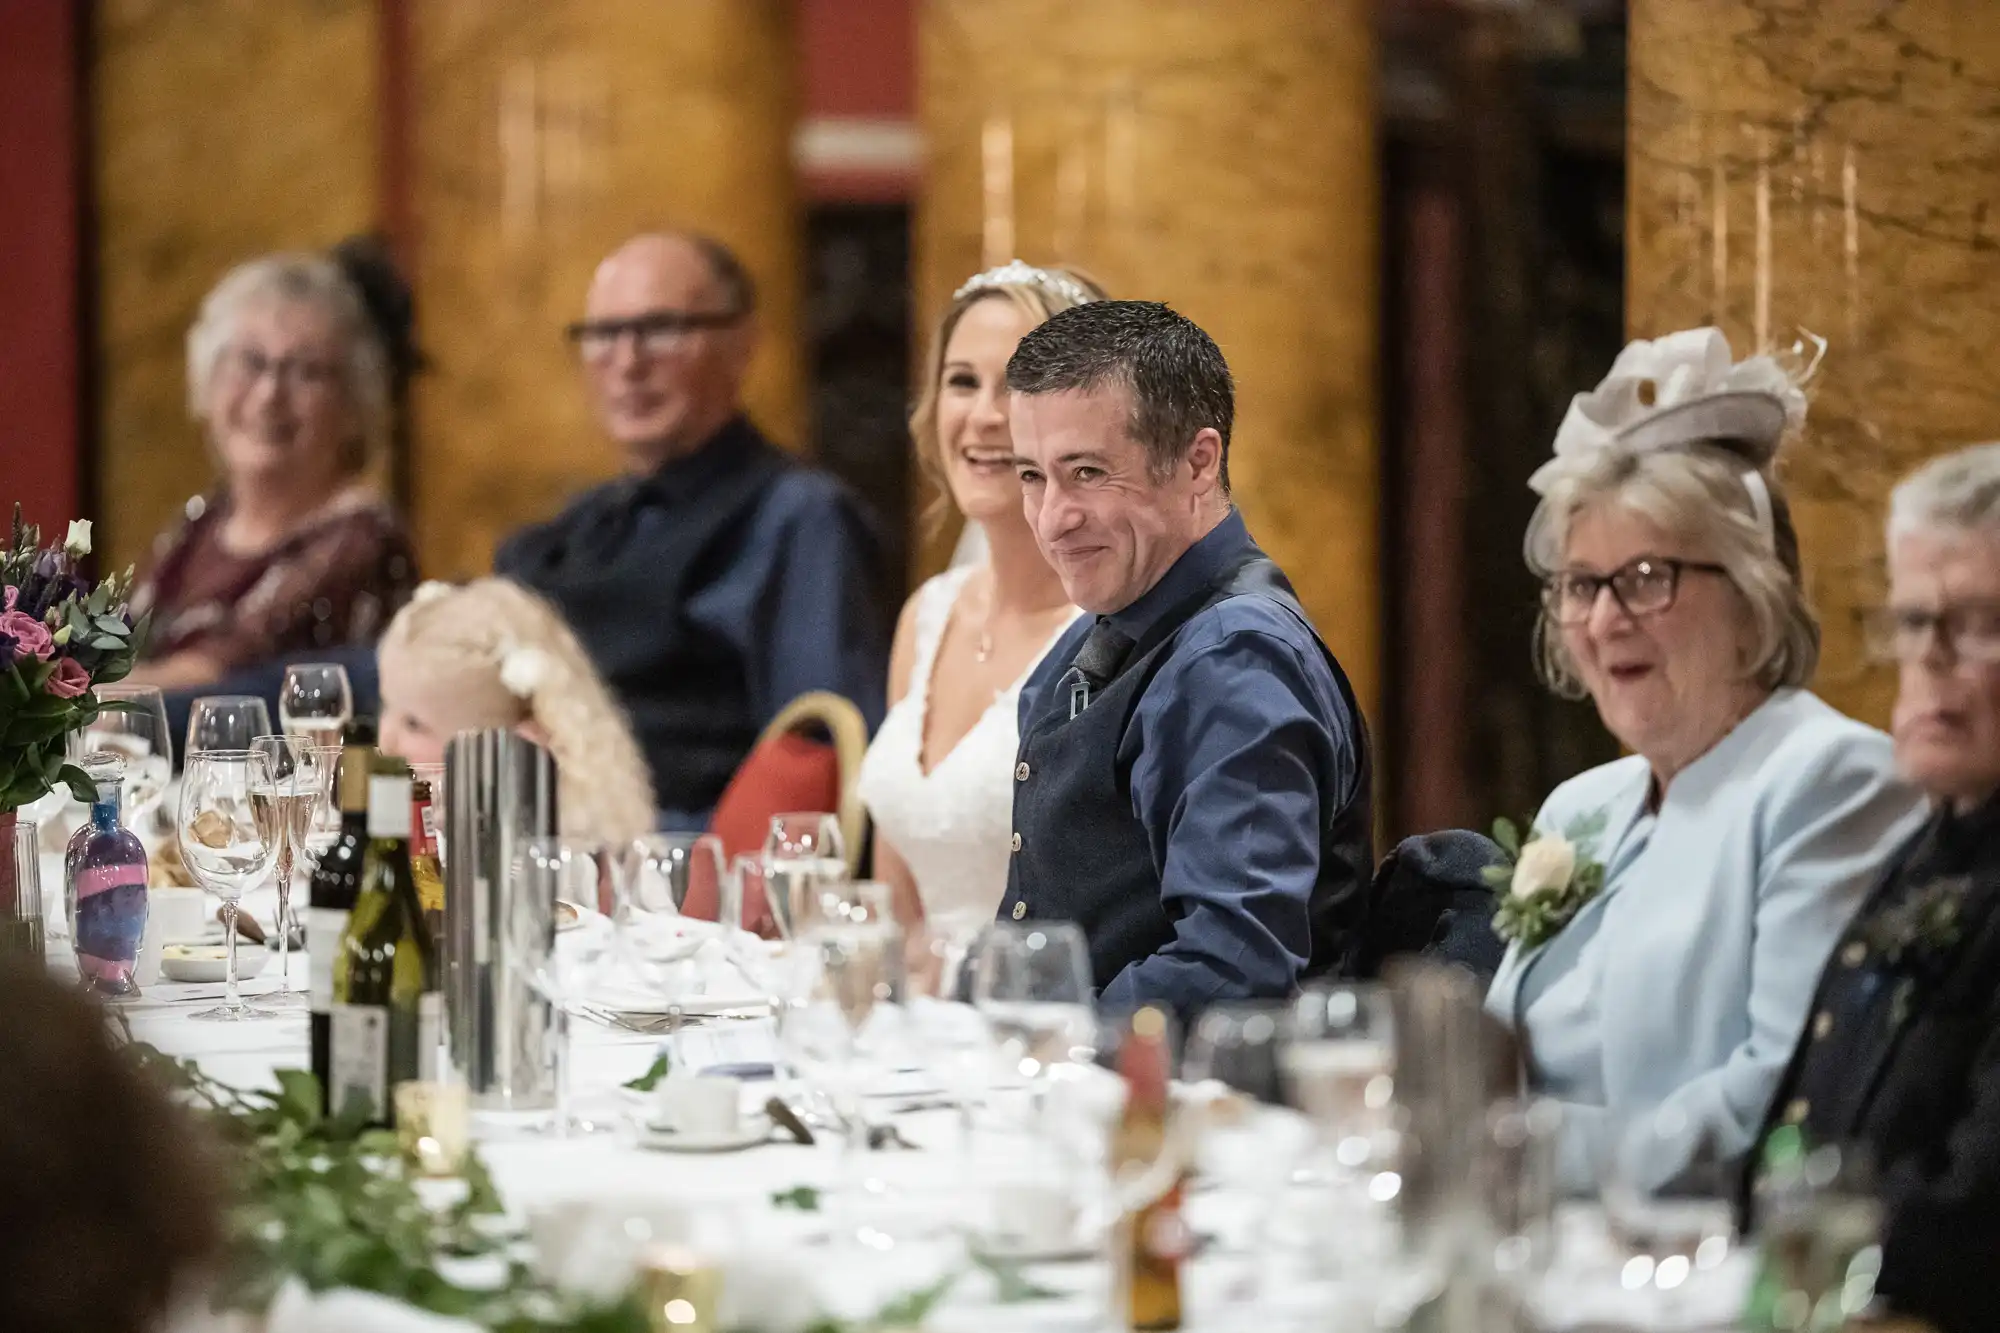 A group of people dressed formally are seated at a long table with white tablecloth, glassware, and plates. Prominently, a bride and man in a blue vest smile while others converse and look on.